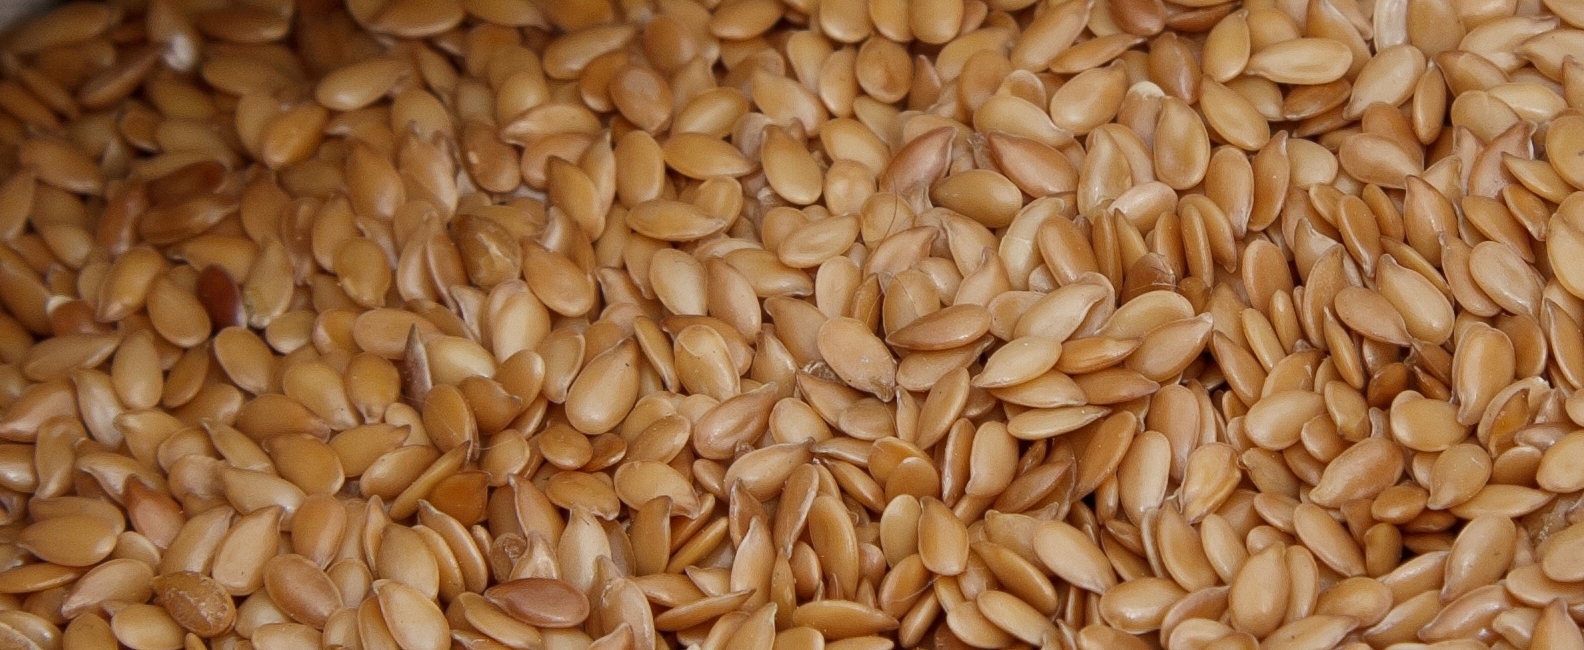 Linseed Flax one of the World's healthiest foods